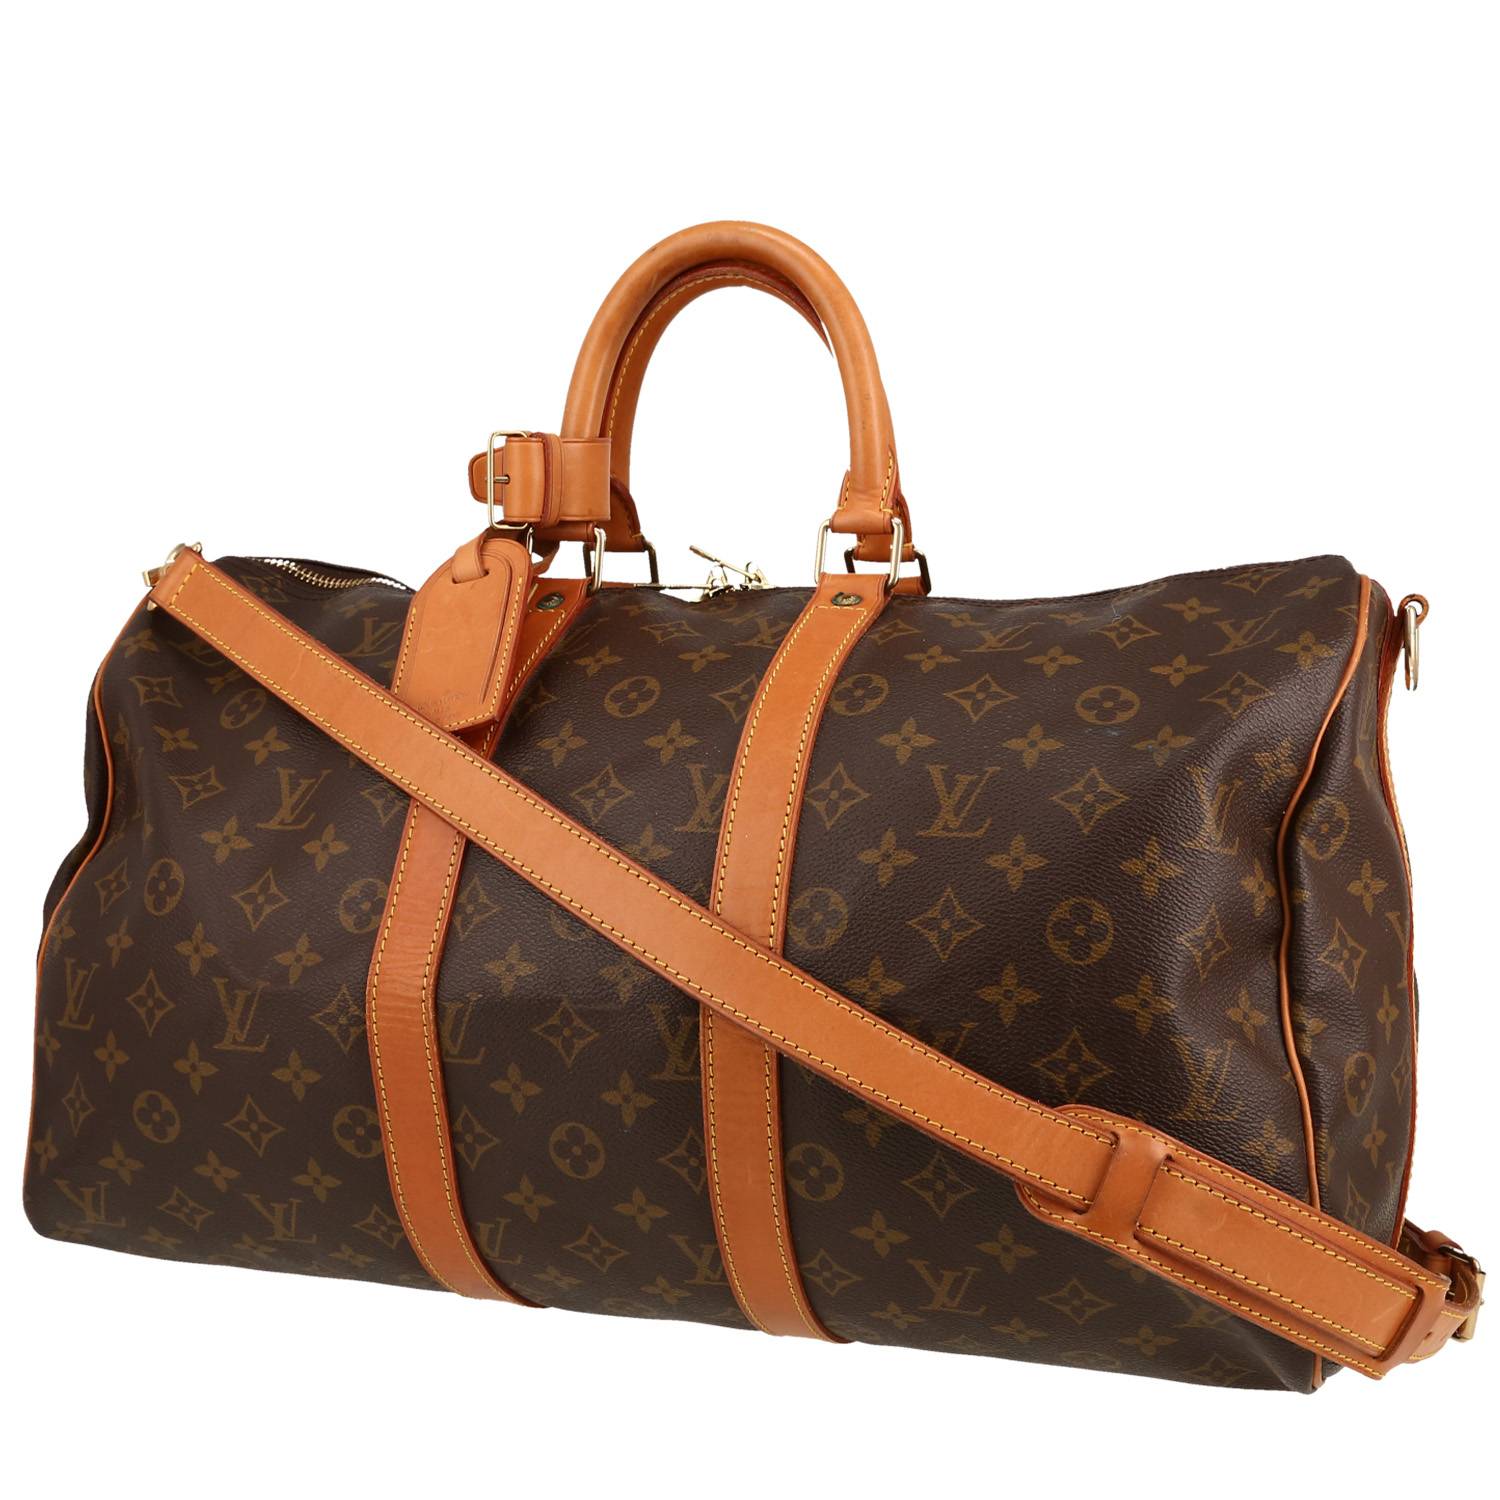 Keepall 45 Travel Bag In Brown Monogram Canvas And